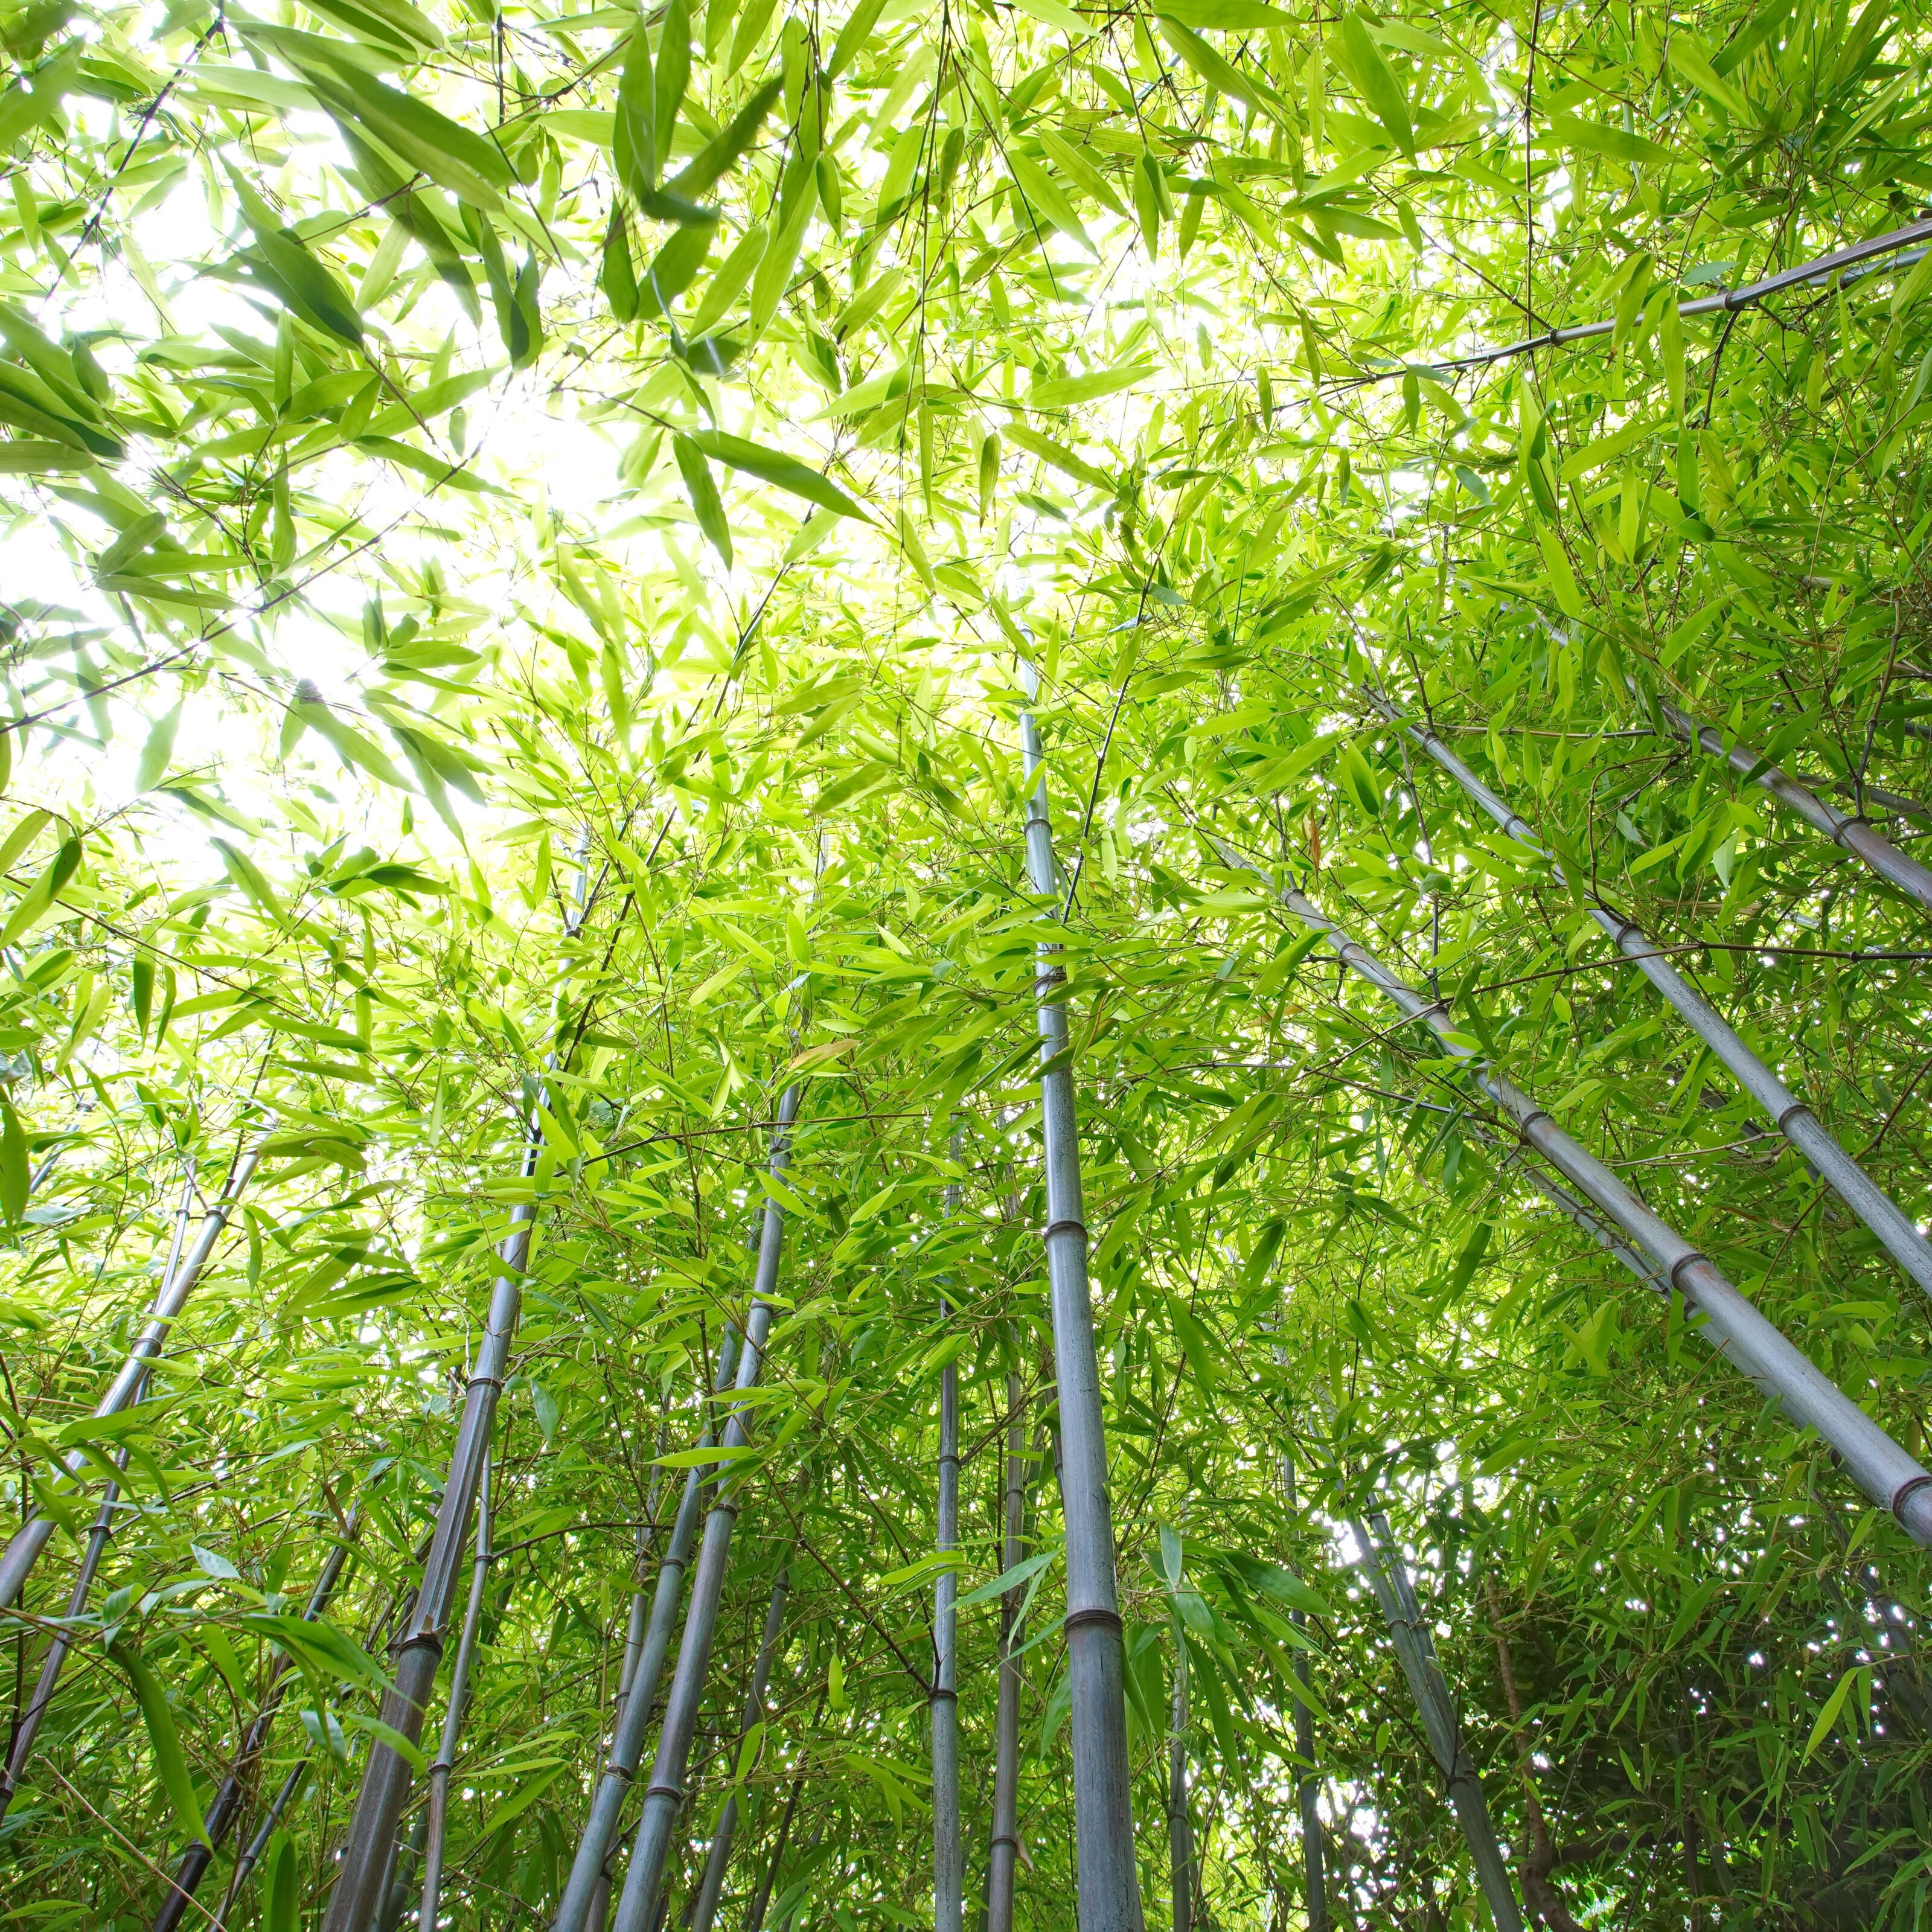 28,169 Bamboo Forest Wallpaper Images, Stock Photos & Vectors | Shutterstock